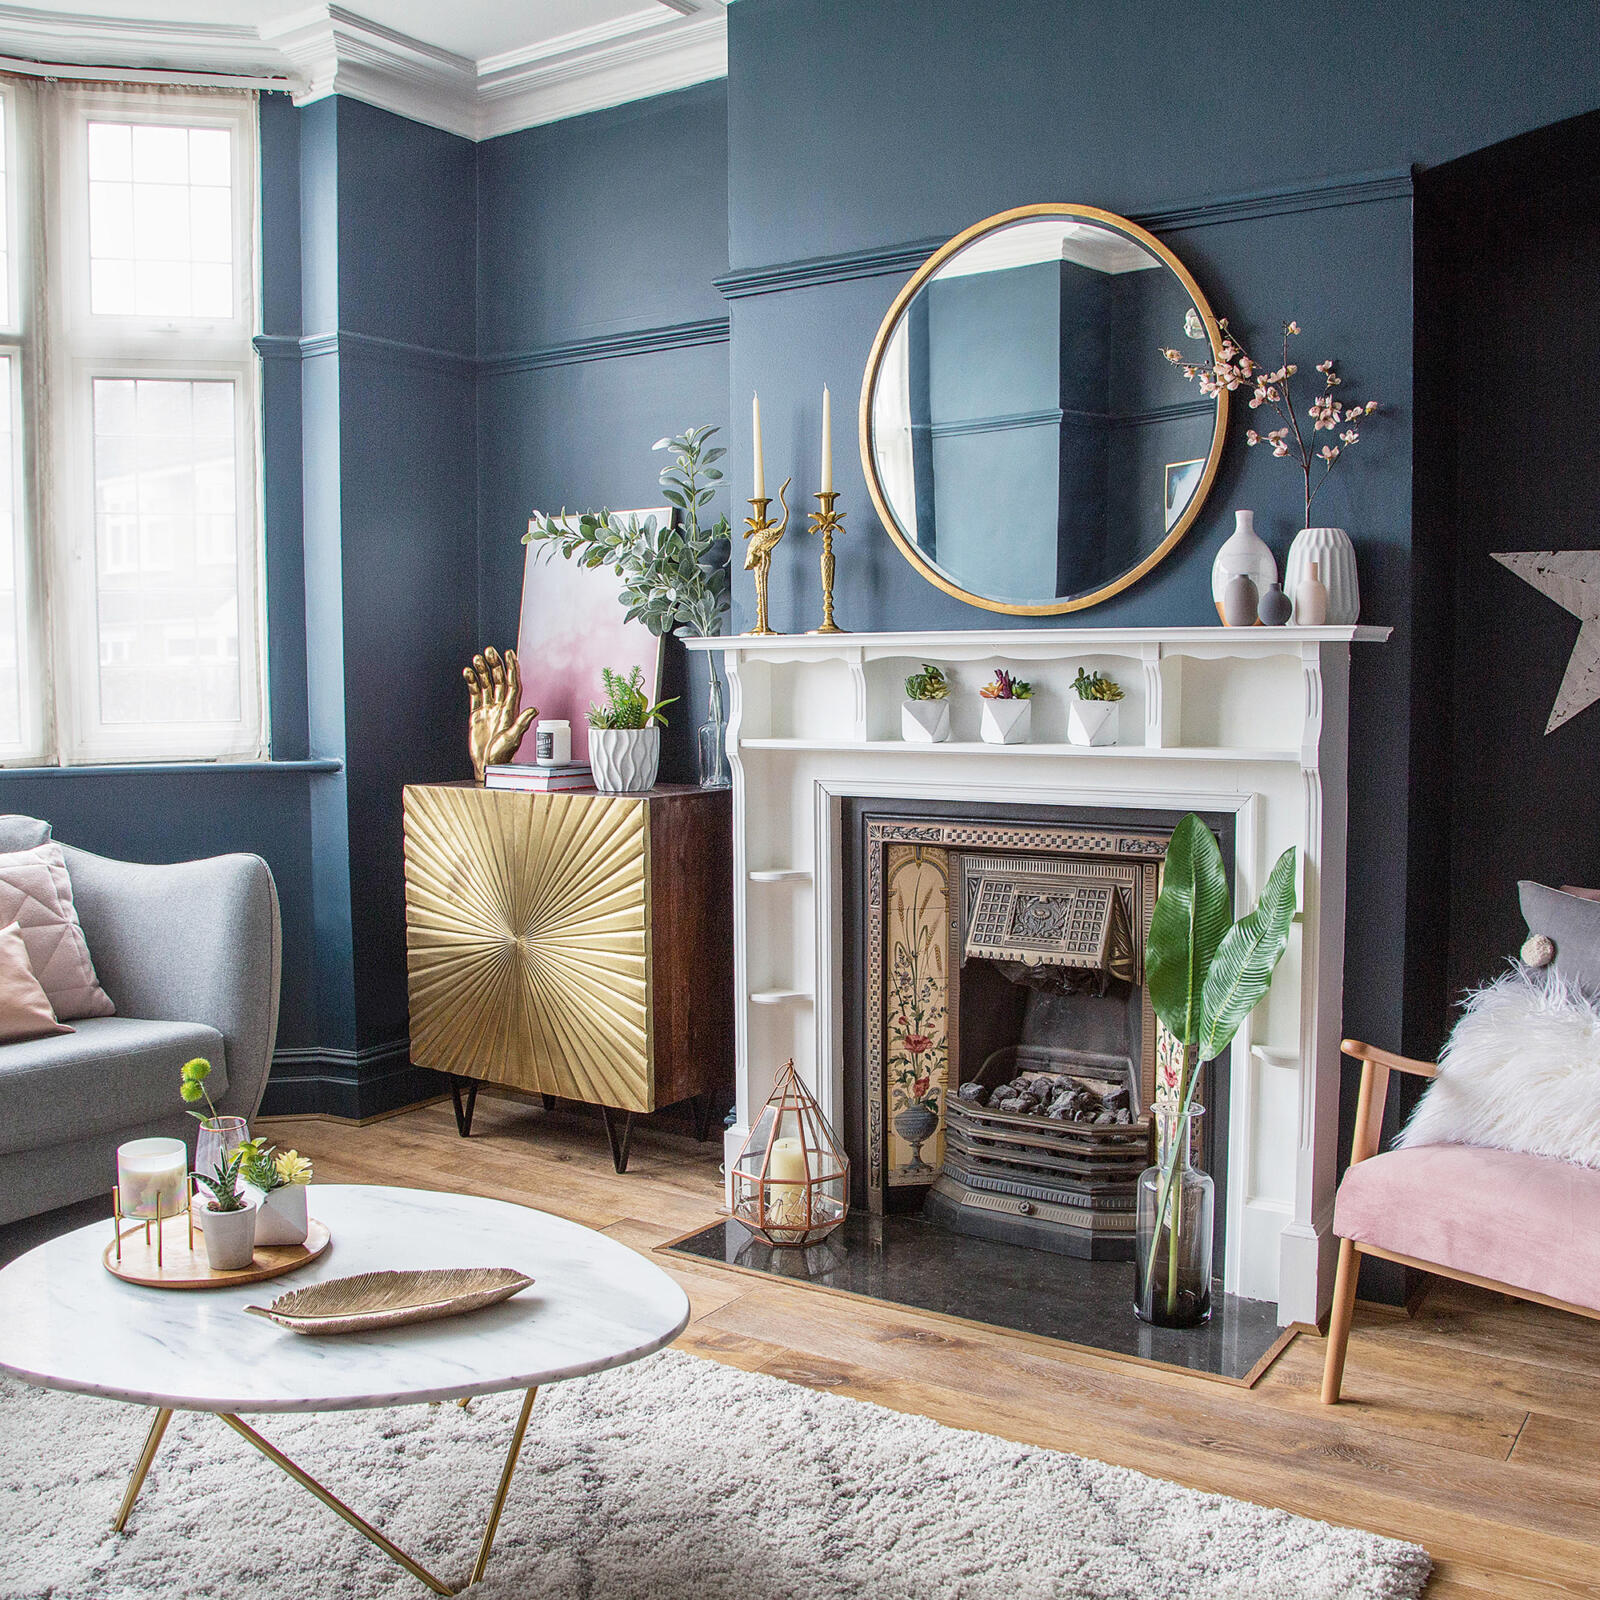 A living room with blue walls and gold accents featuring mantel decor.